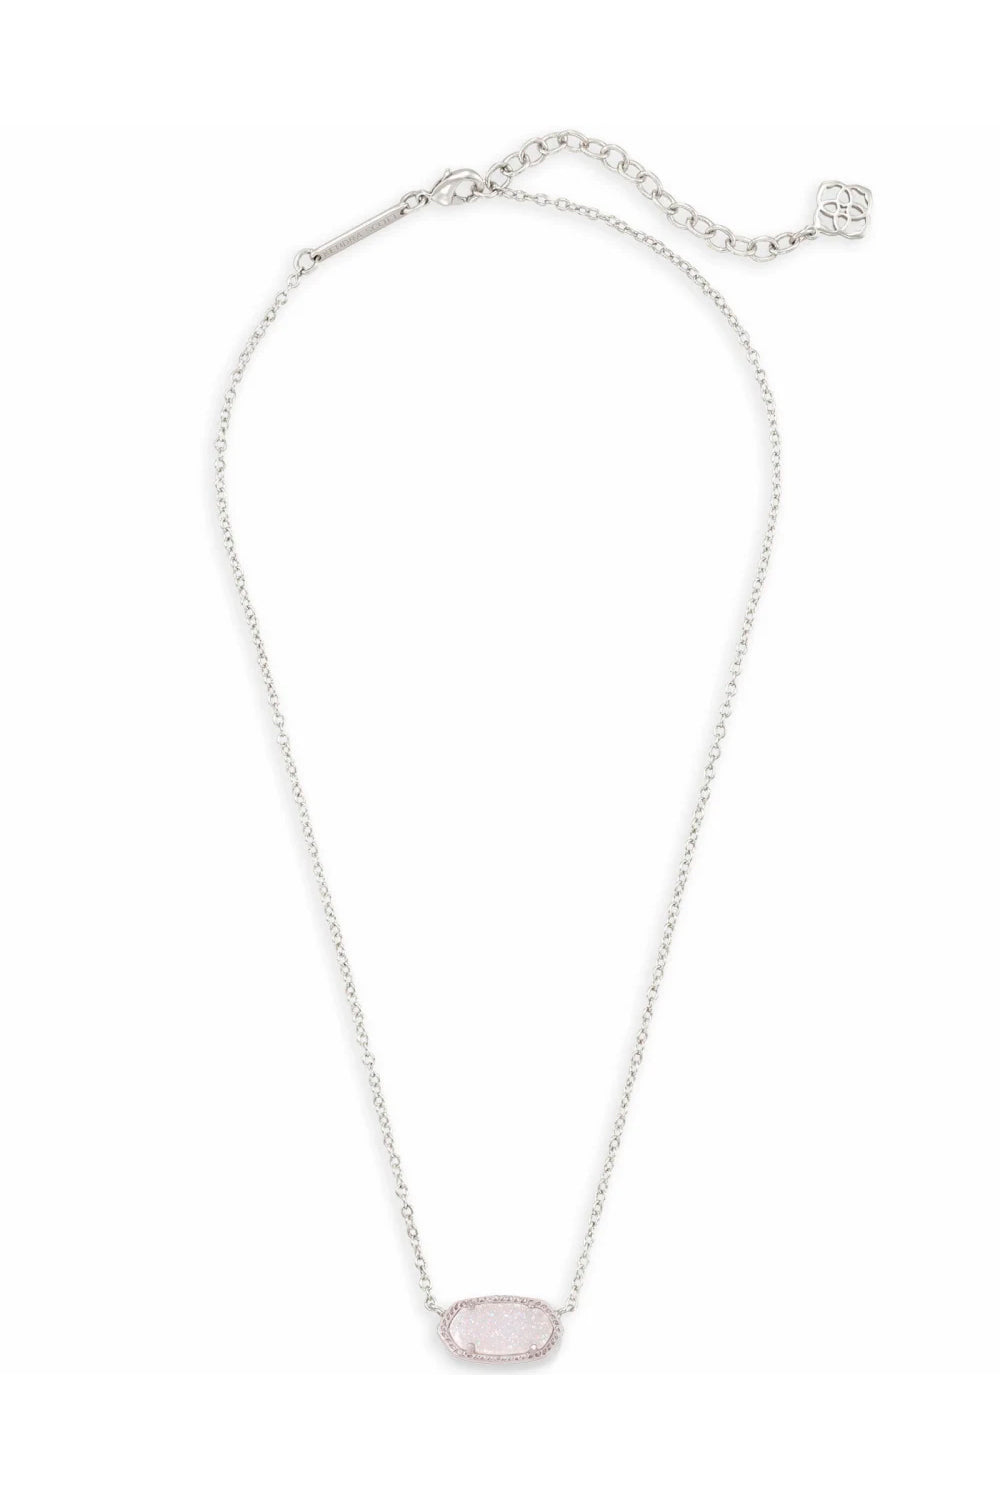 Elisa Silver Pendant Necklace in Red Illusion | Kendra Scott